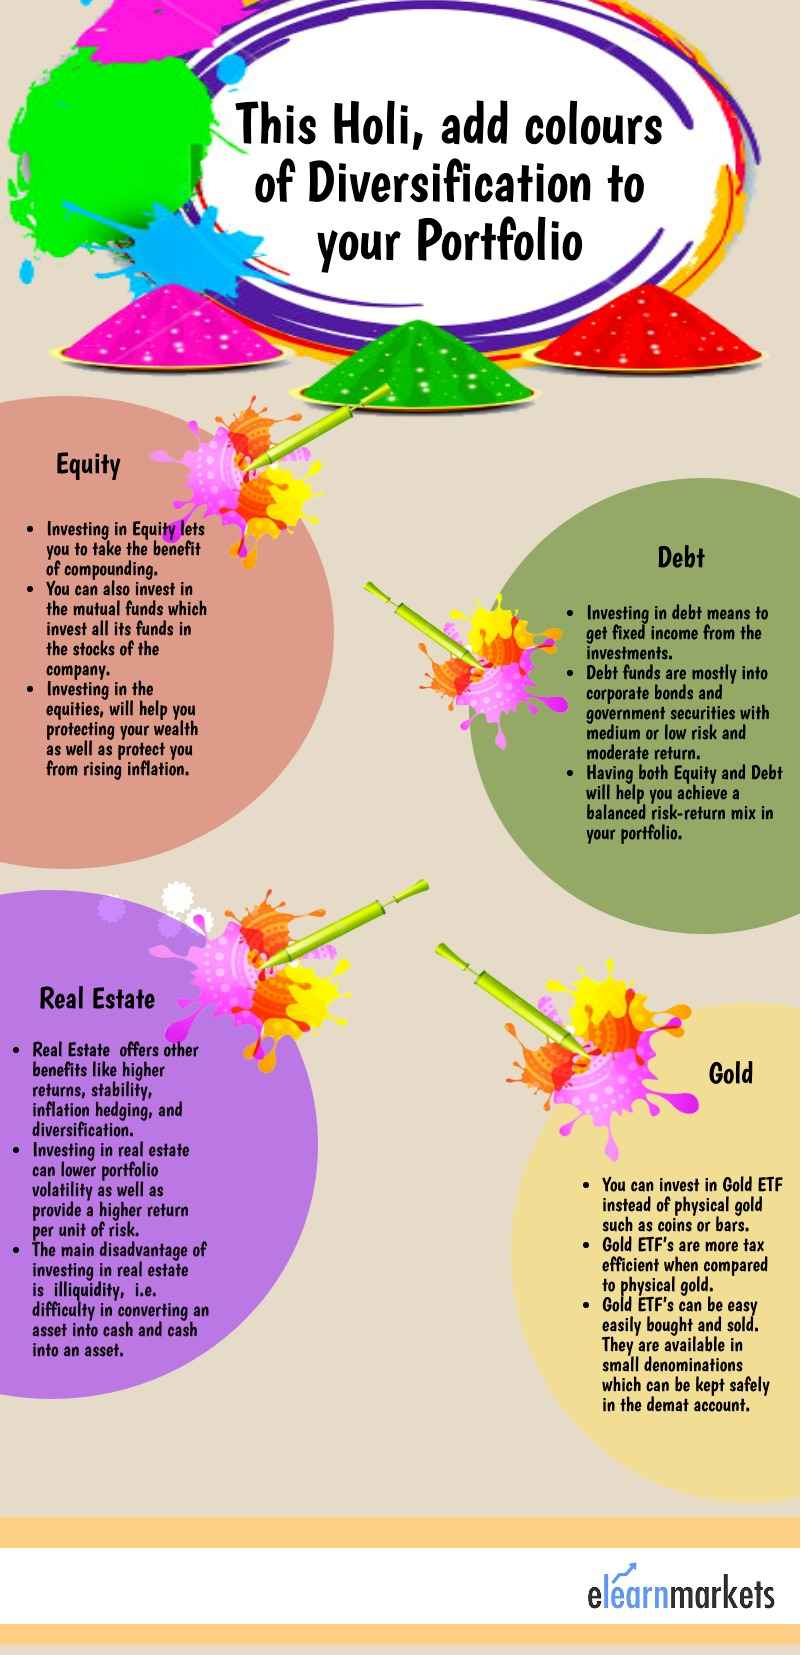 This Holi, add colours of Diversification to your Portfolio 2